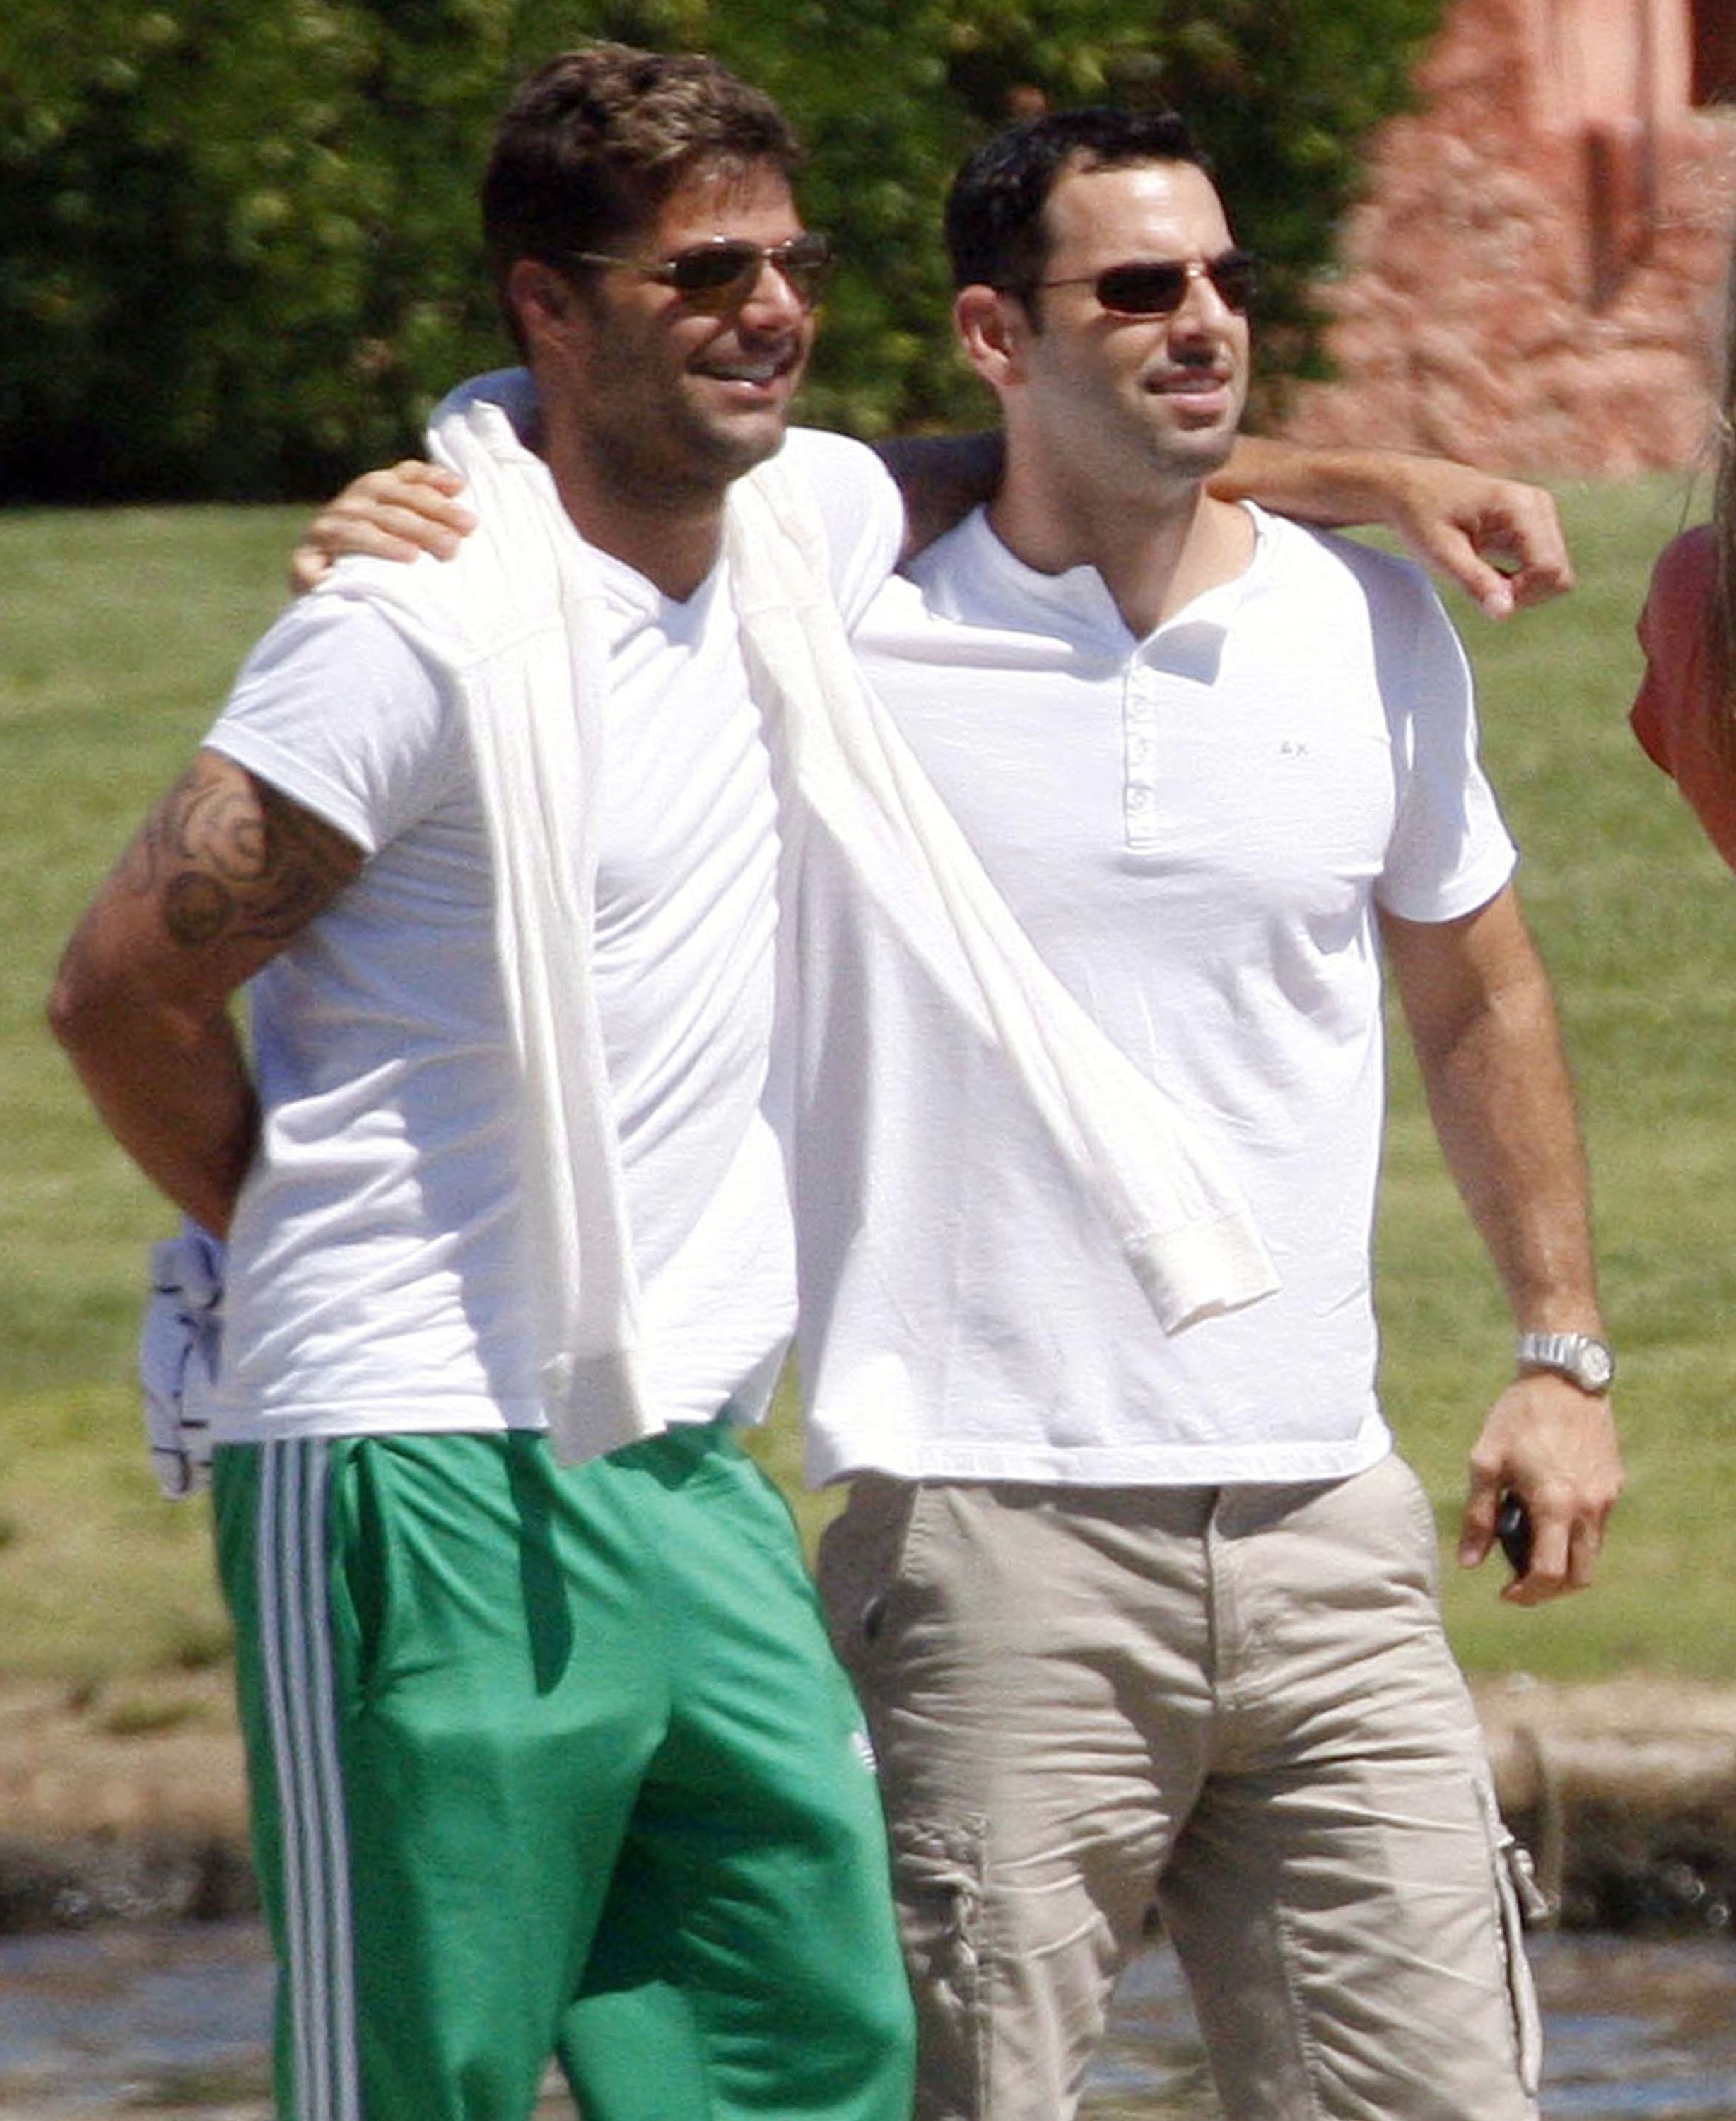 Ricky and Carlos outside embracing